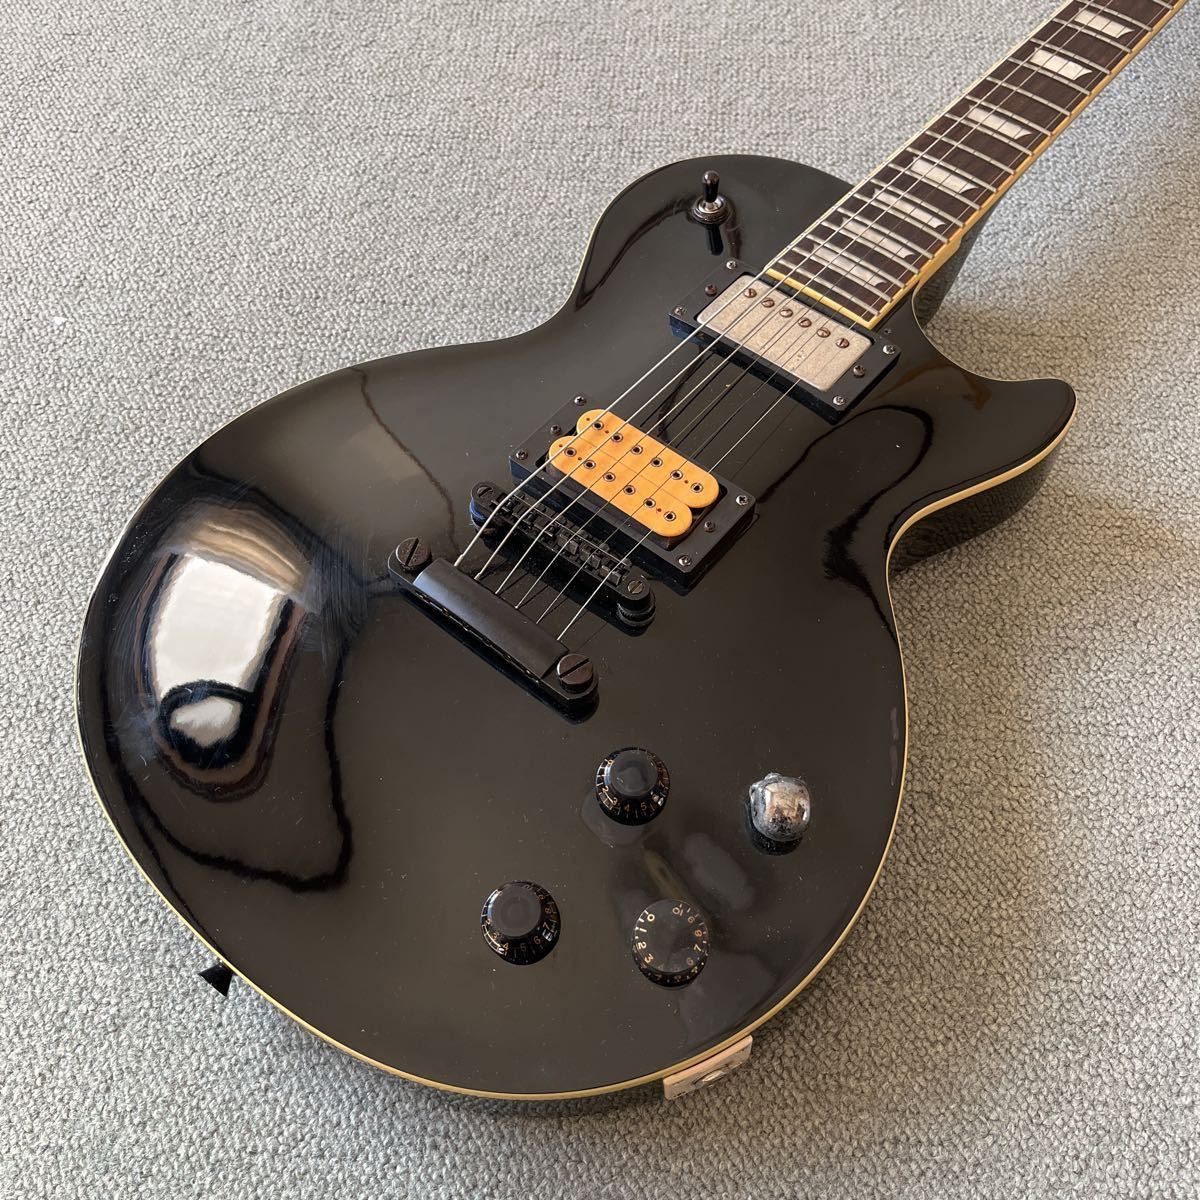 epiphone by Gibson Les Paul standard BLK 黒　エピフォン　ギブソン　レスポール　スタンダード　ジャンク　lespaul エレキギター_画像9